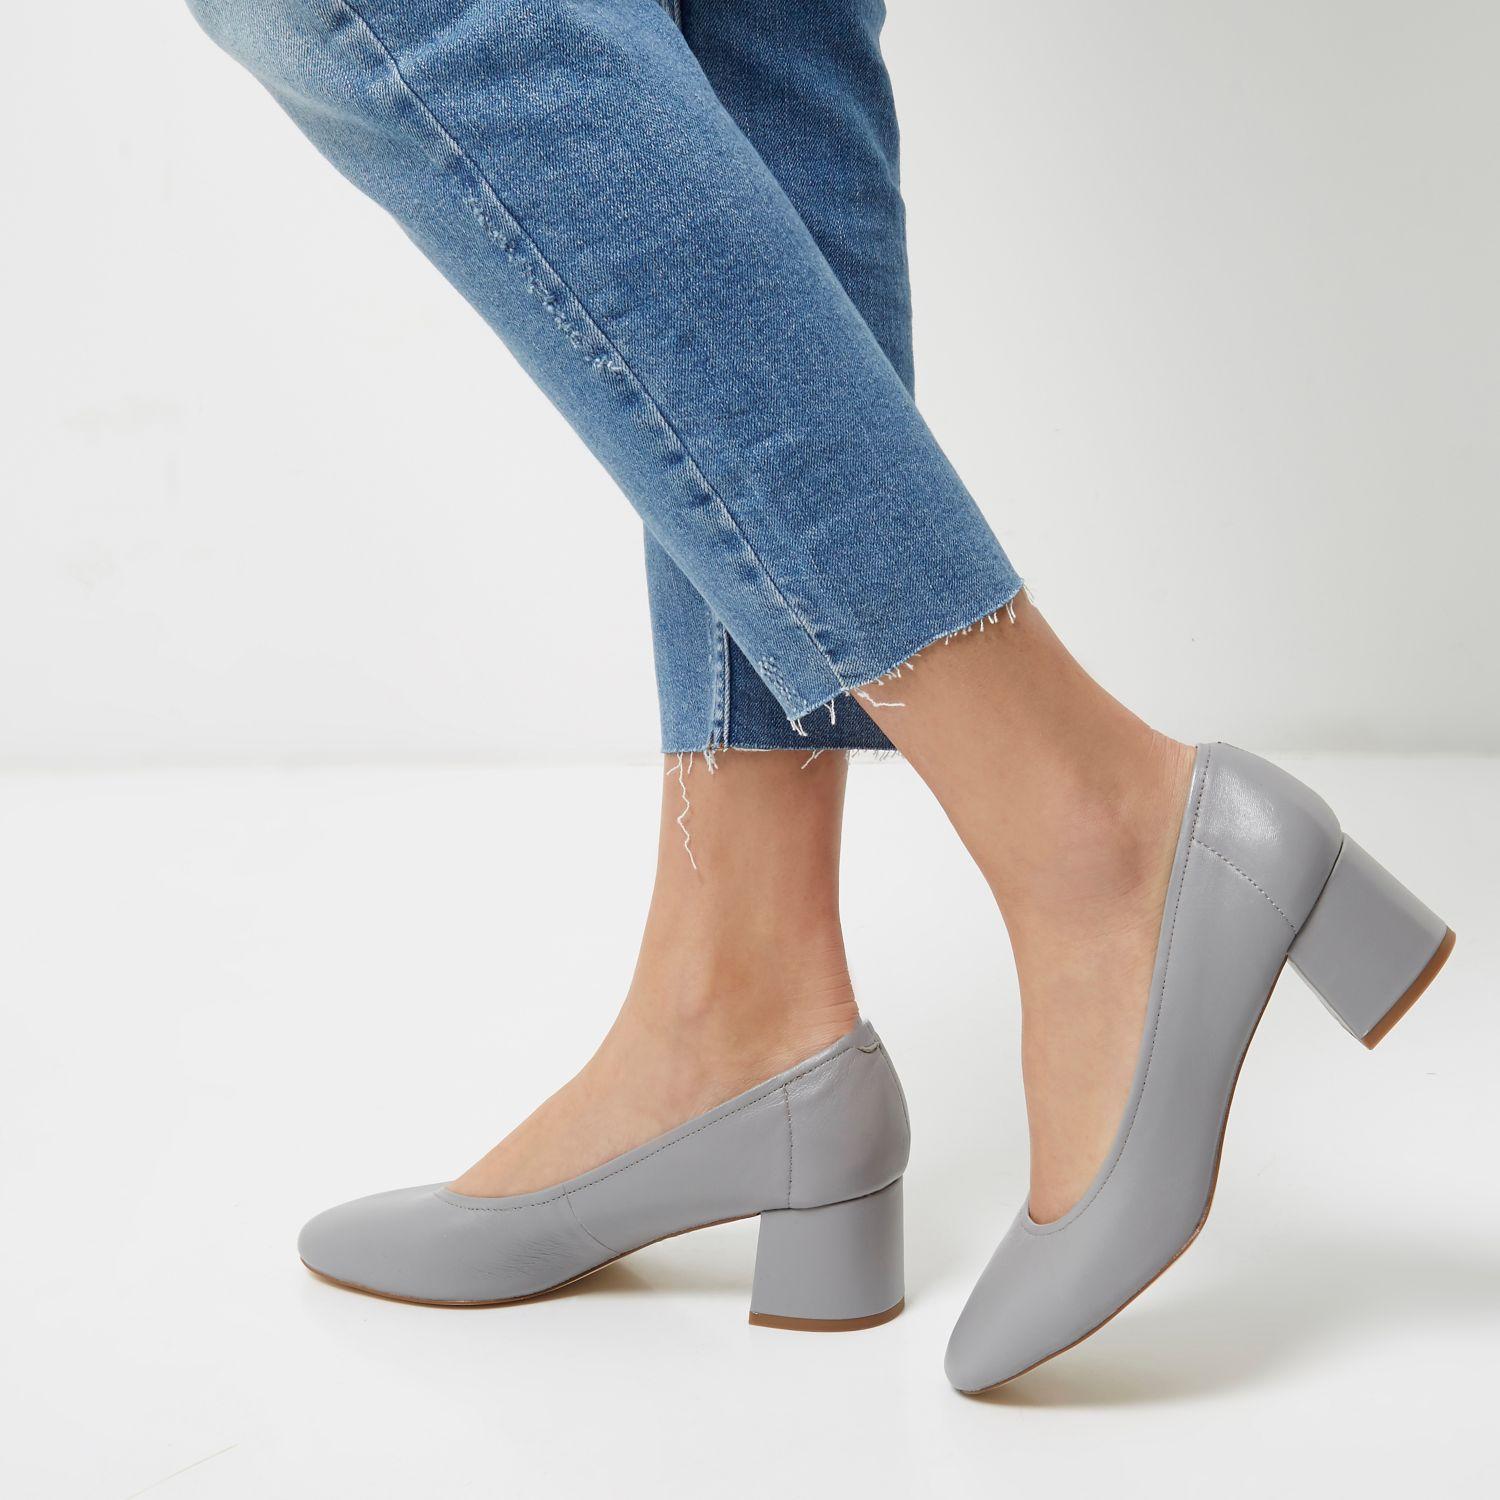 River Island Grey Leather Block Heel Glove Shoes in Gray - Lyst